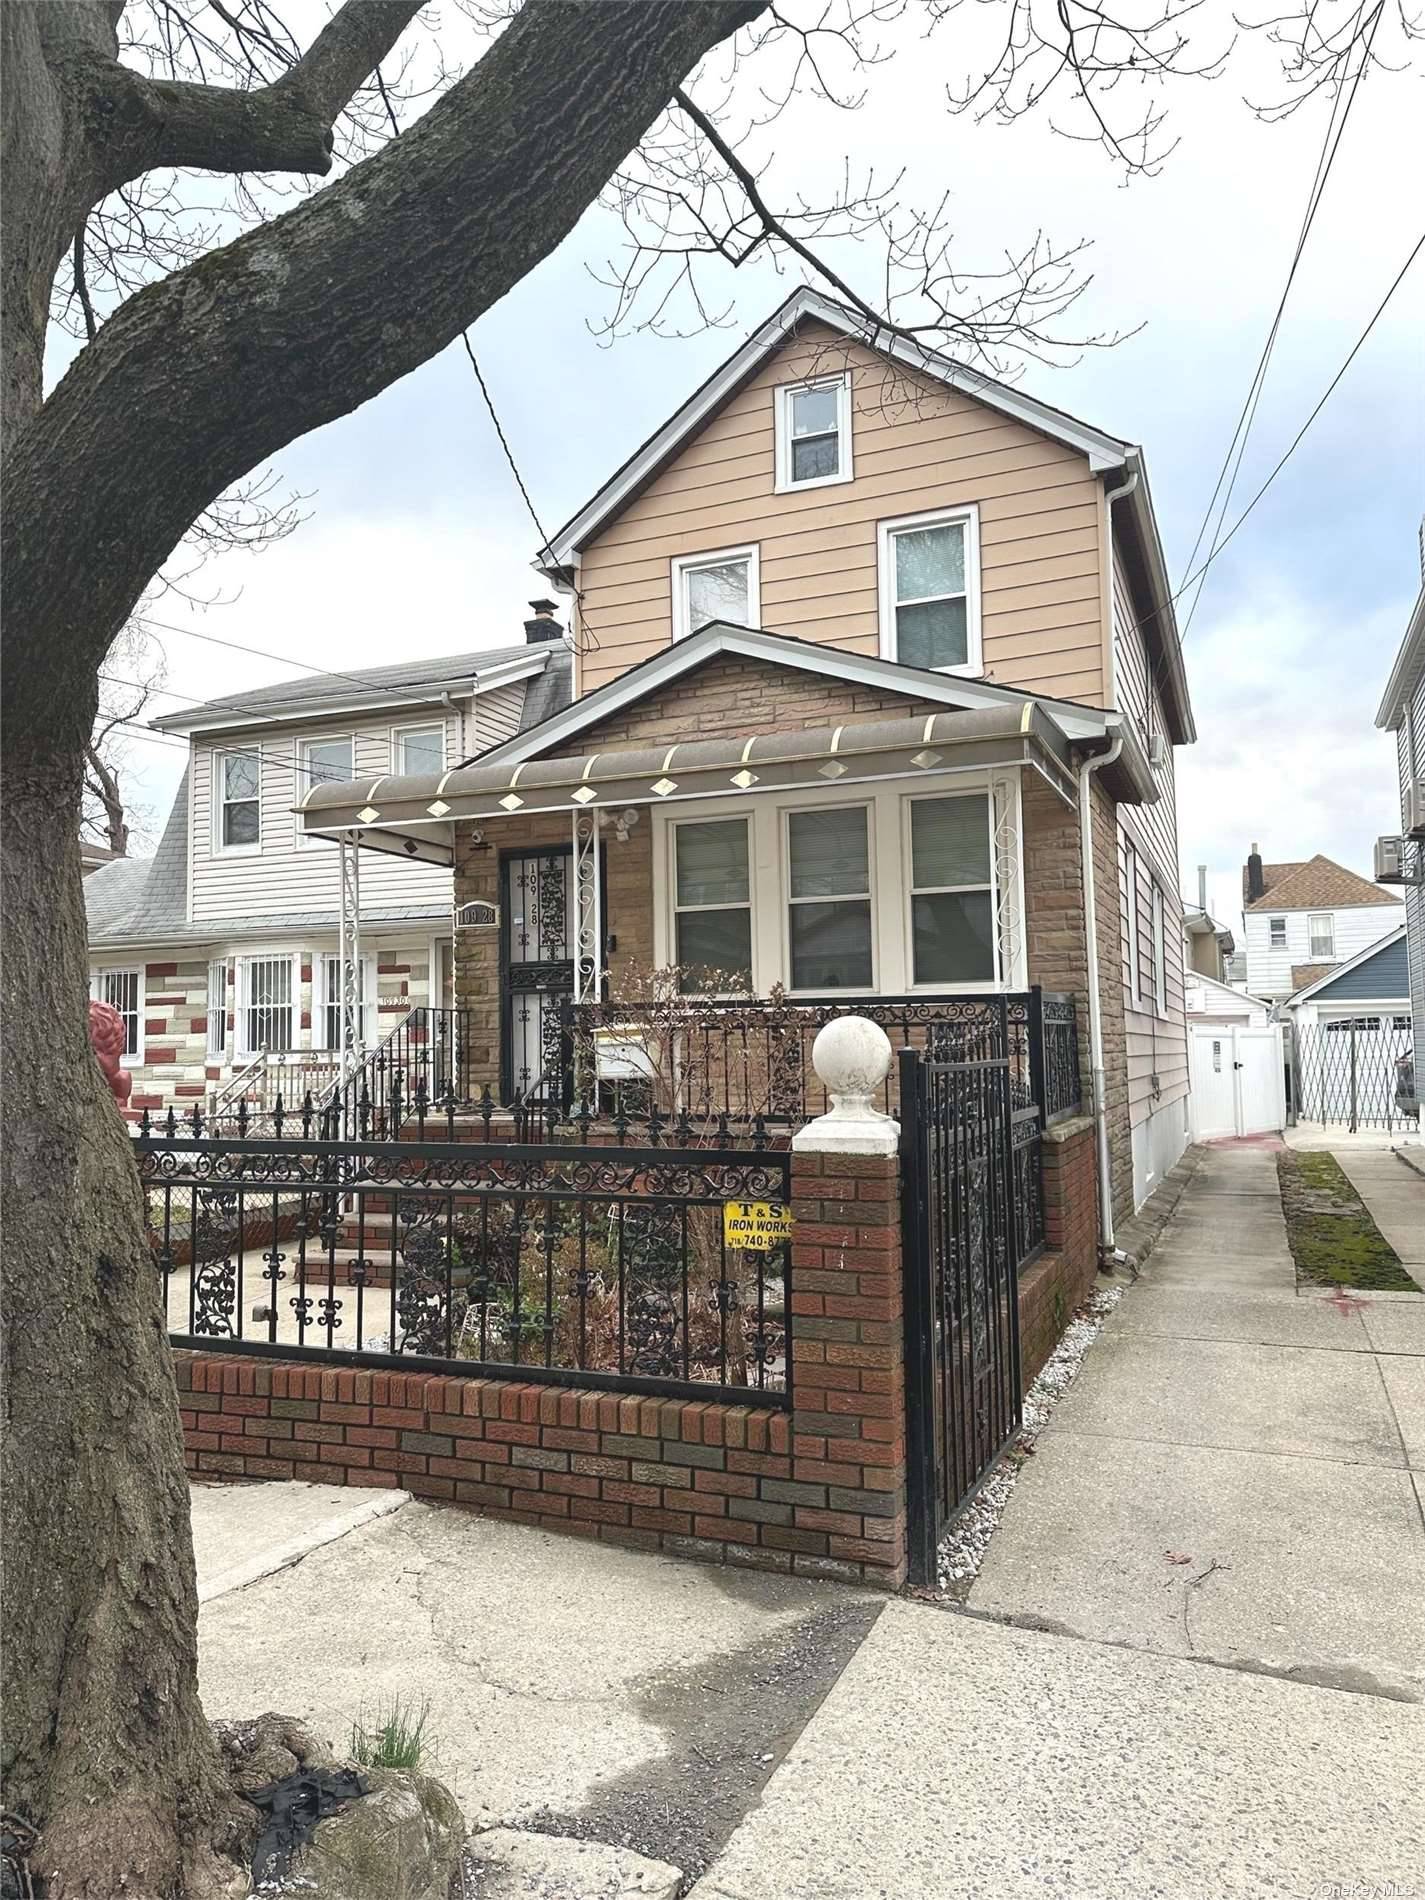 Prime South Ozone Park ; offers a fully detached, single family home with a shared driveway.